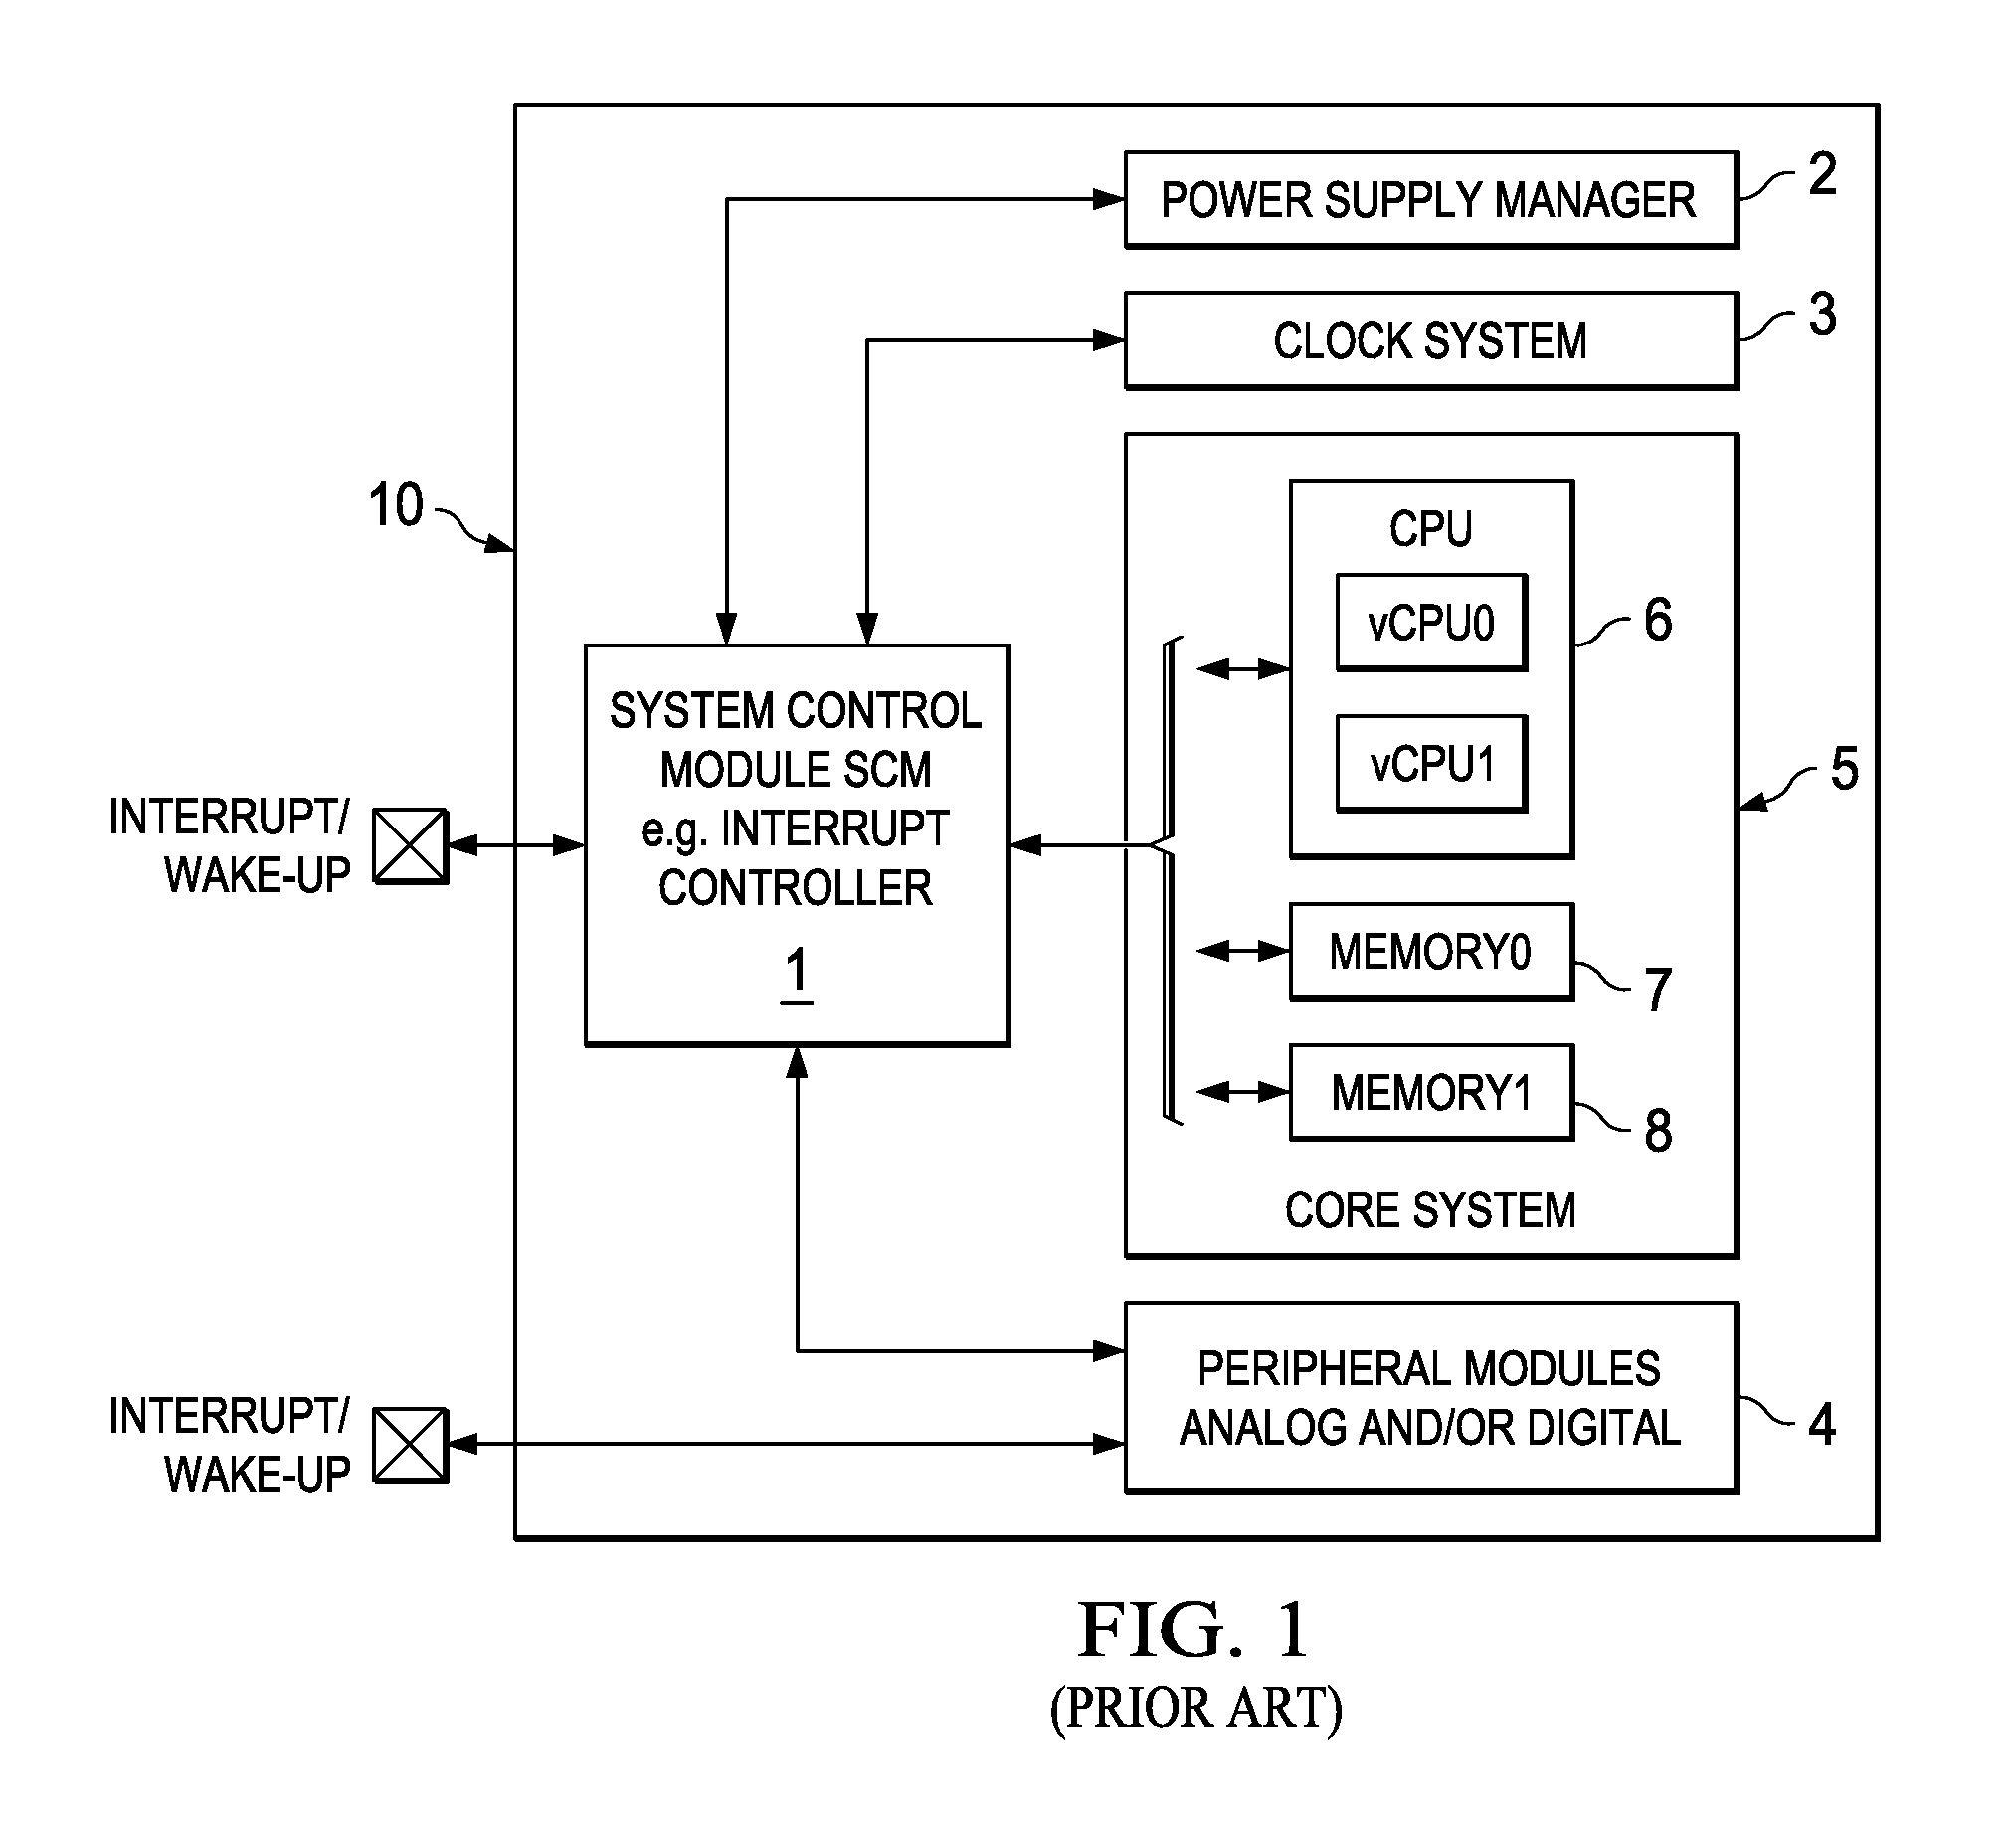 Apparatus and Method with Controlled Switch Method